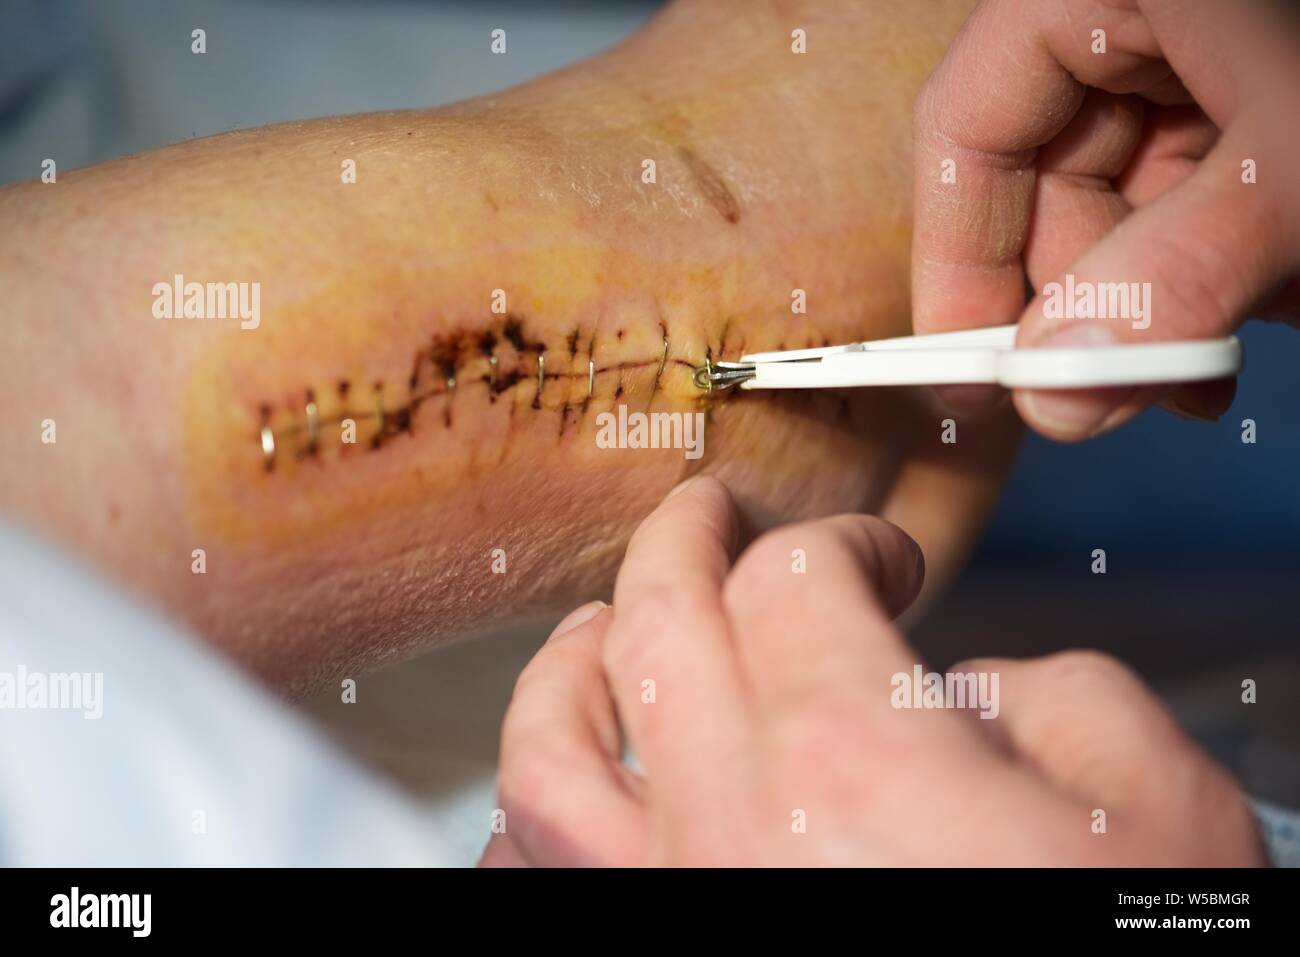 Surgical staples: removal of surgical staples from the right ankle of a female patient following surgical intervention to repair a broken ankle Stock Photo